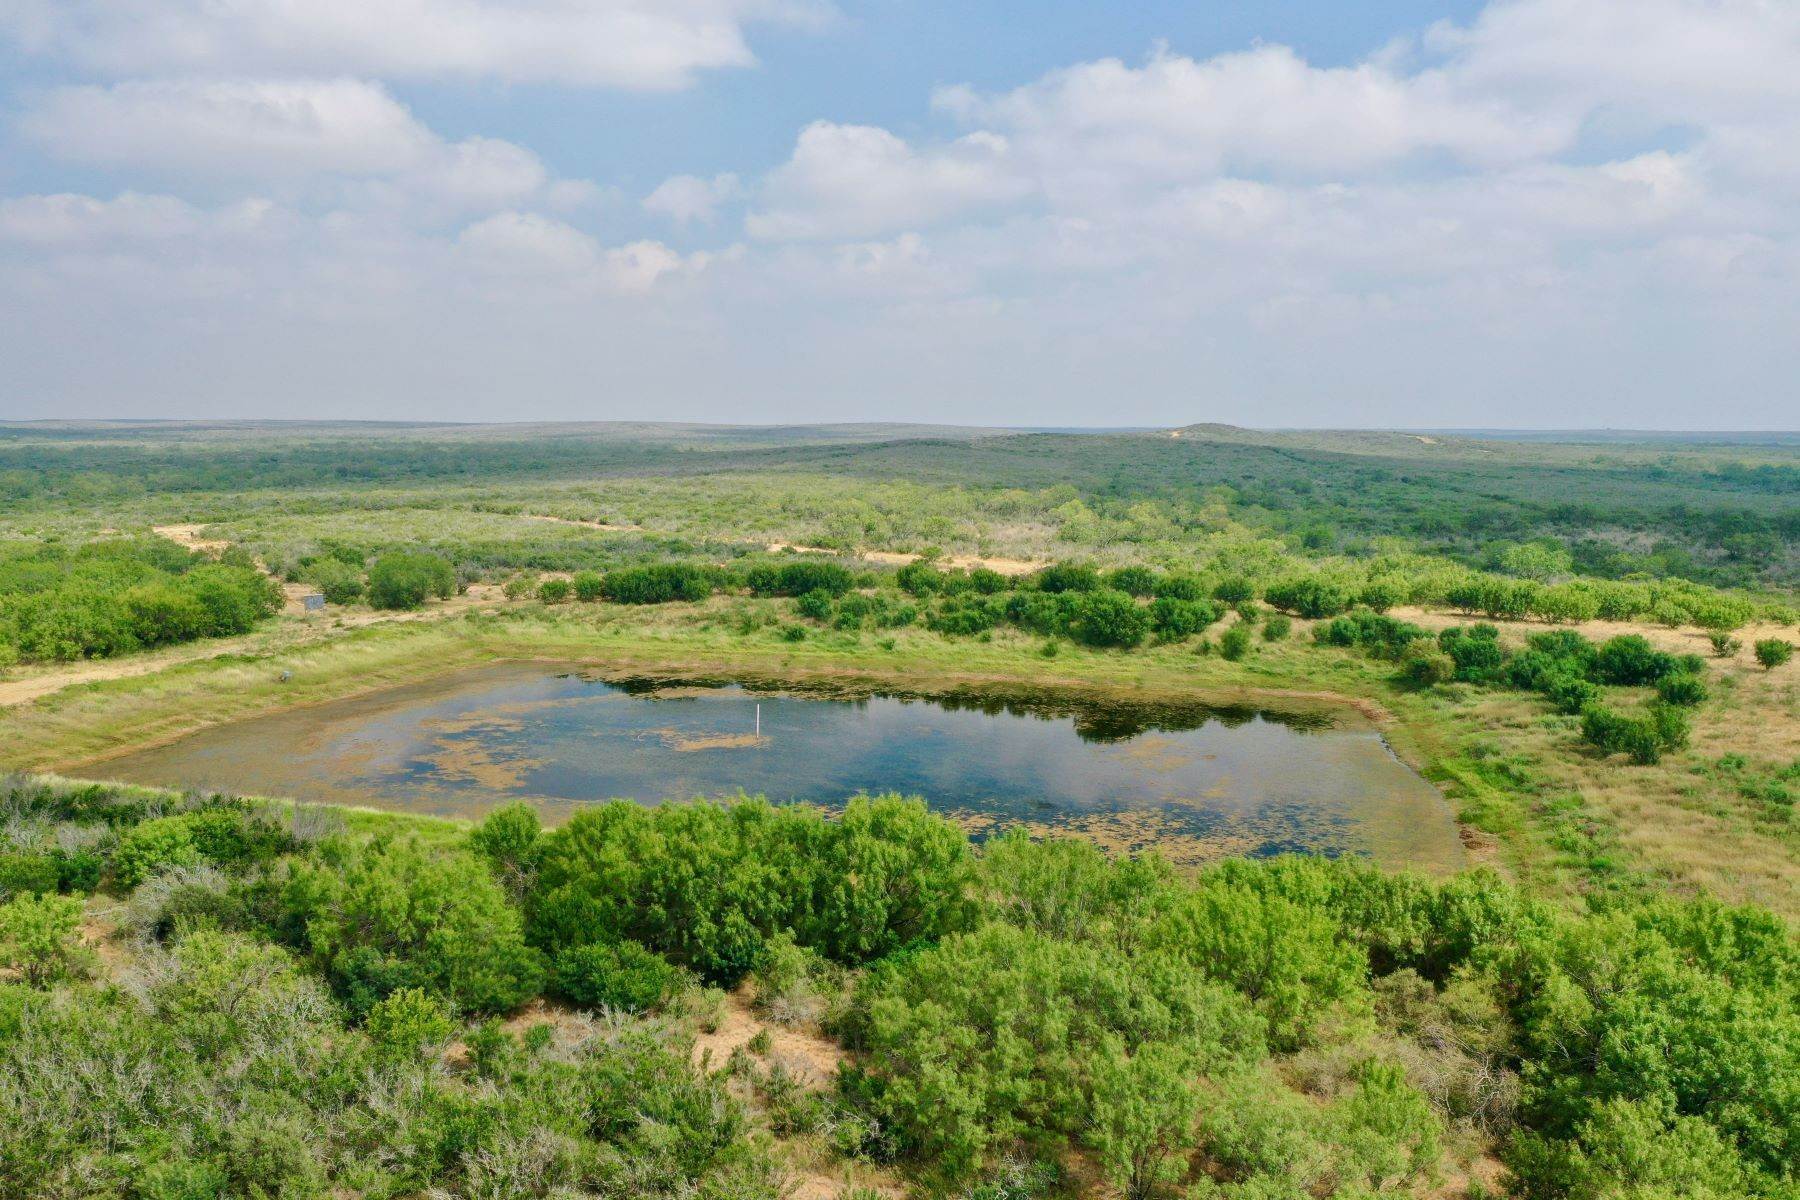 Farm and Ranch Properties for Sale at 5,000+/- Acres Leona River Ranch, Fri County , TX 78061 5,000+/- Acres Leona River Ranch Pearsall, Texas 78061 United States